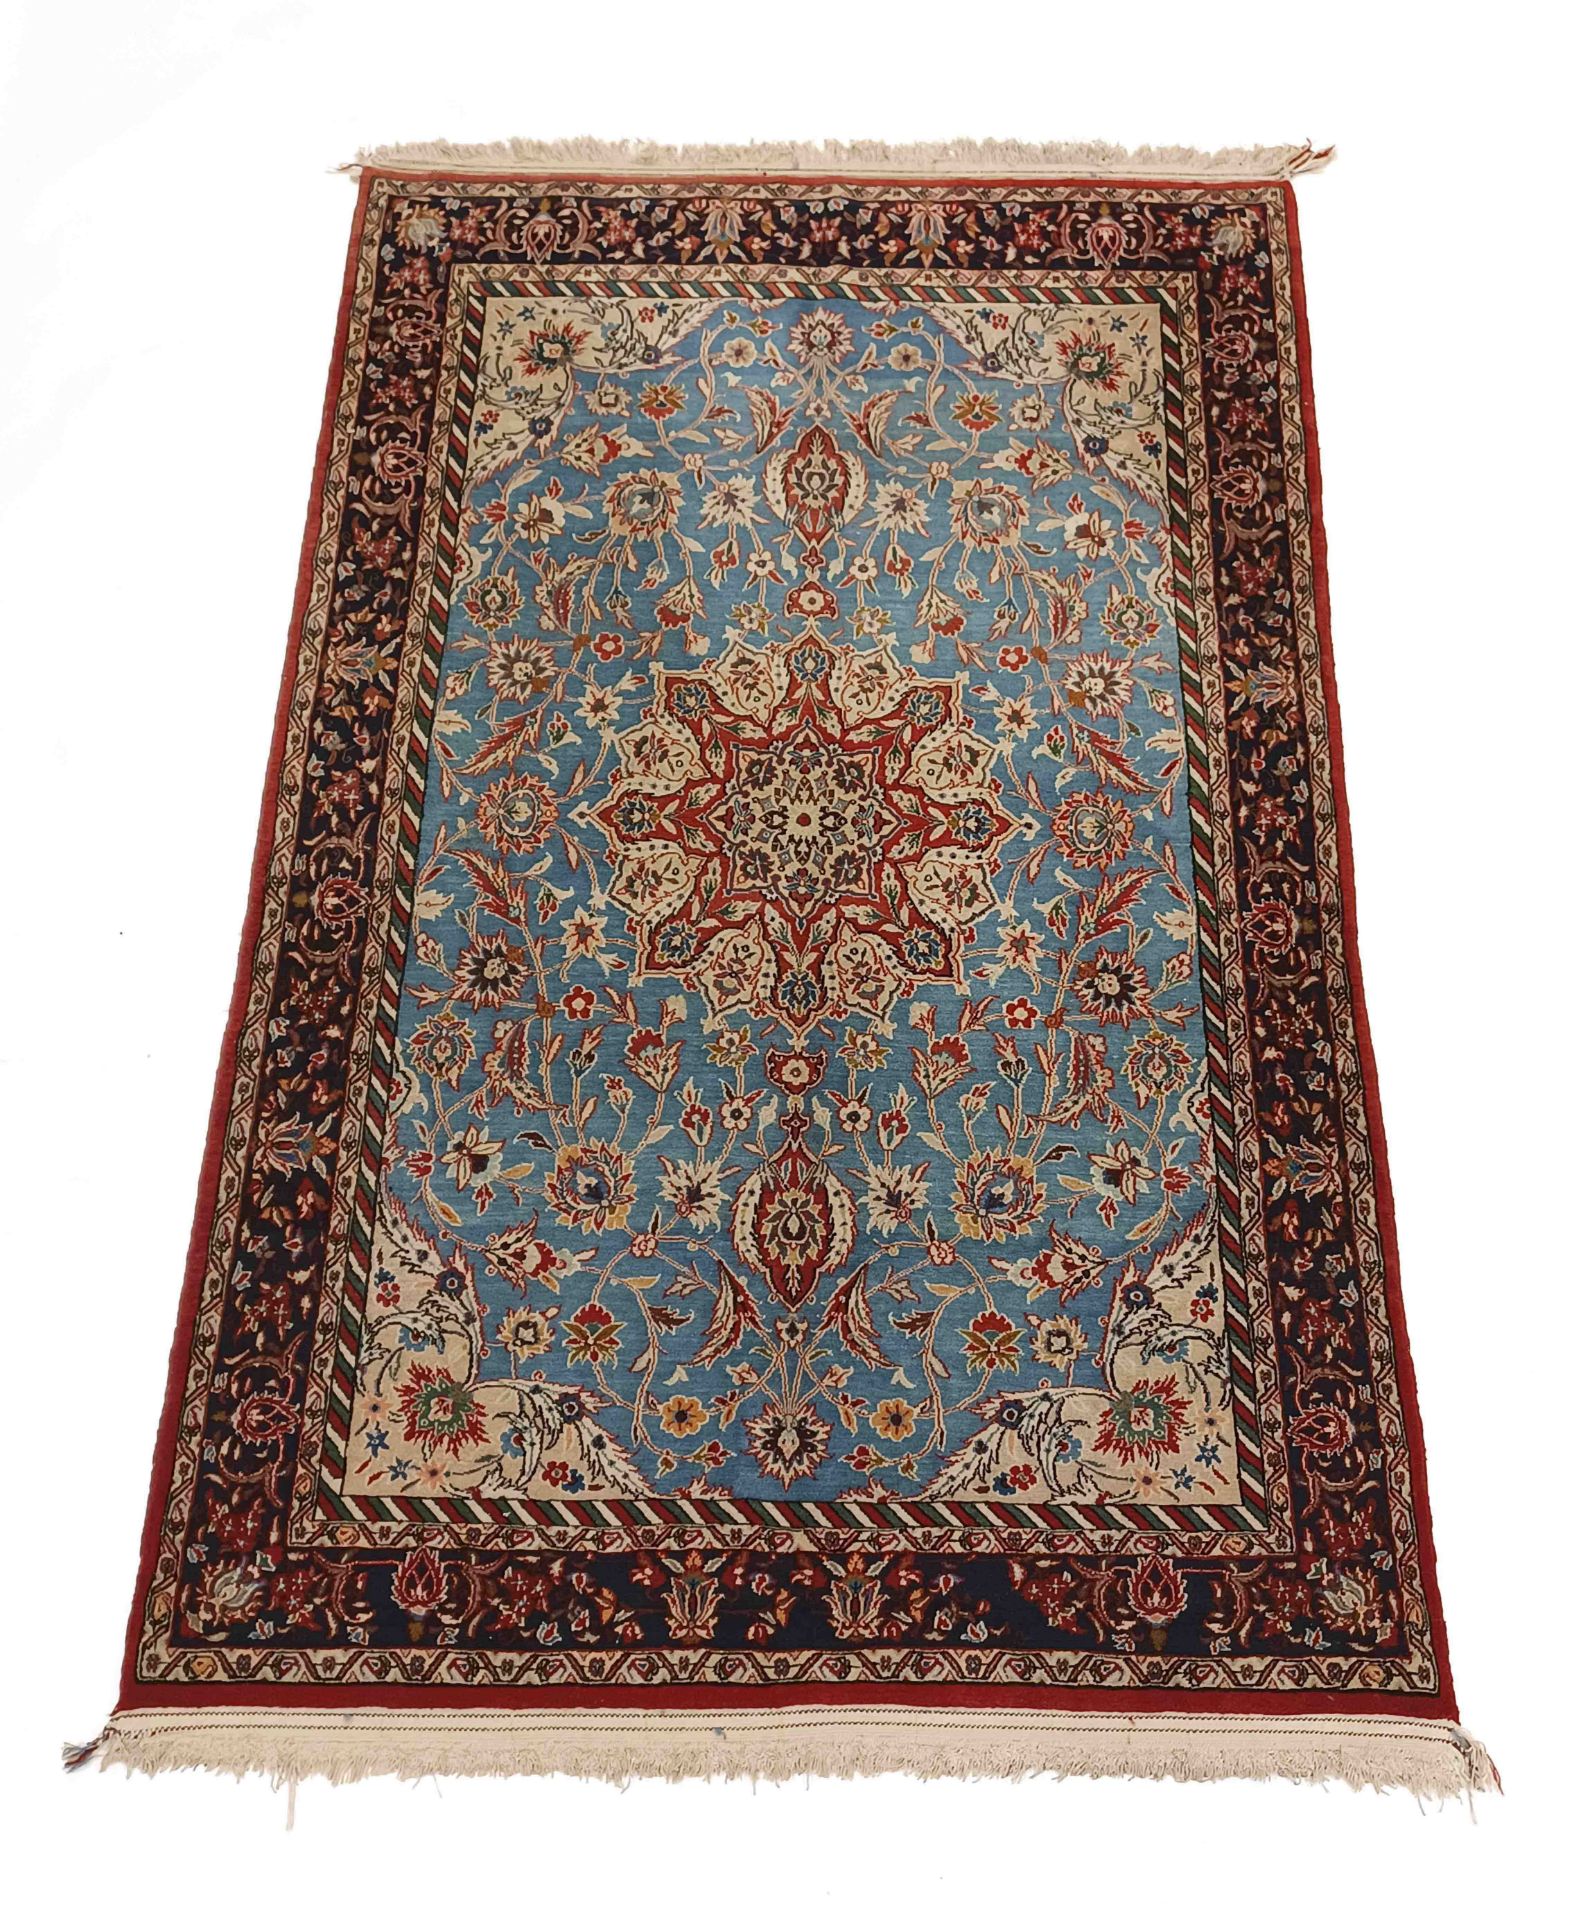 Carpet, Rug, Isfahan, even high pile, fringes with minor wear, 228 x 147 cm